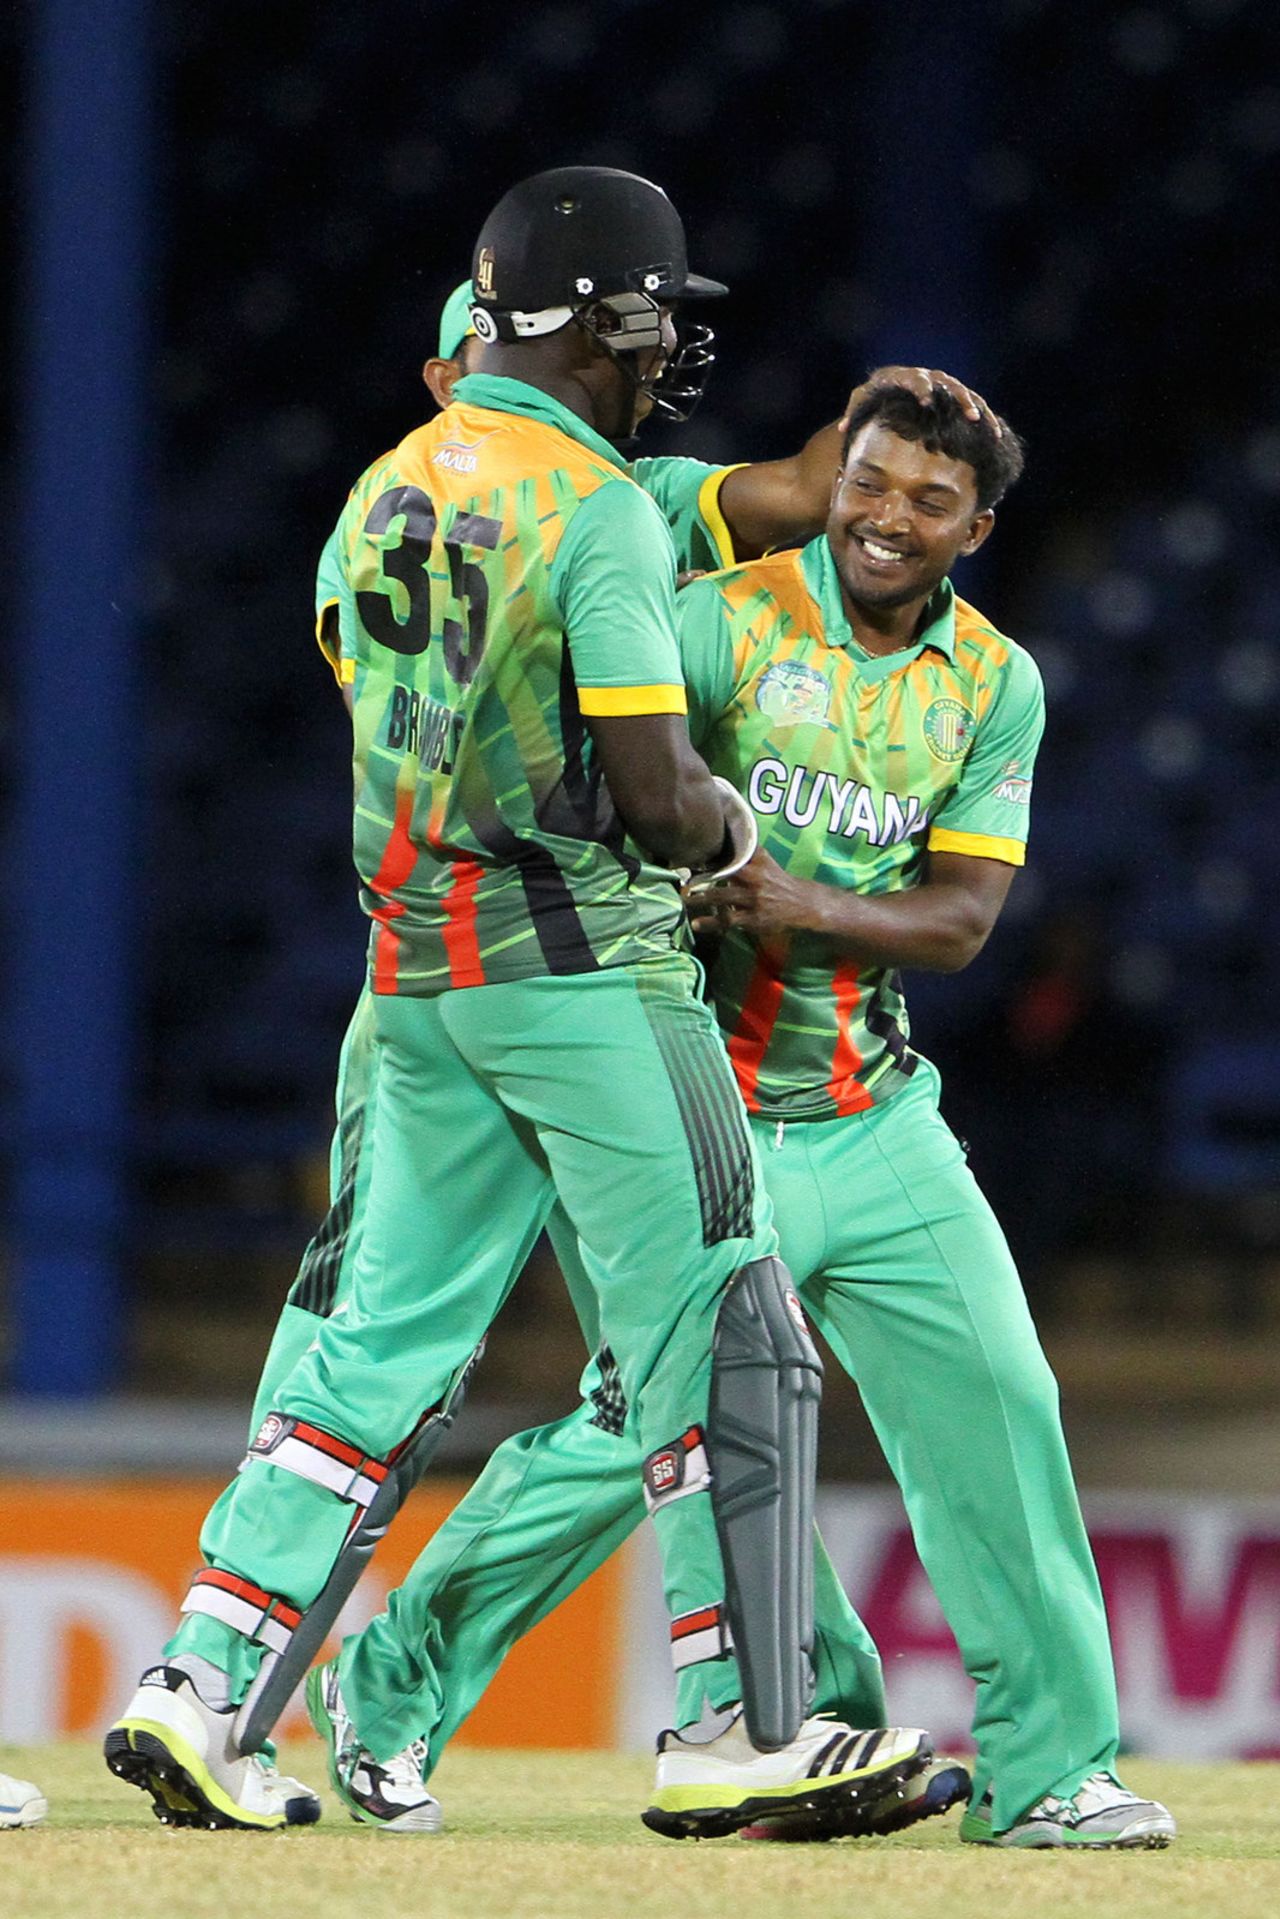 Veerasammy Permaul gets congratulated by teammates for spinning out the tail, Guyana v Windward Islands, Nagico Super50, Port-of-Spain, February 4, 2014